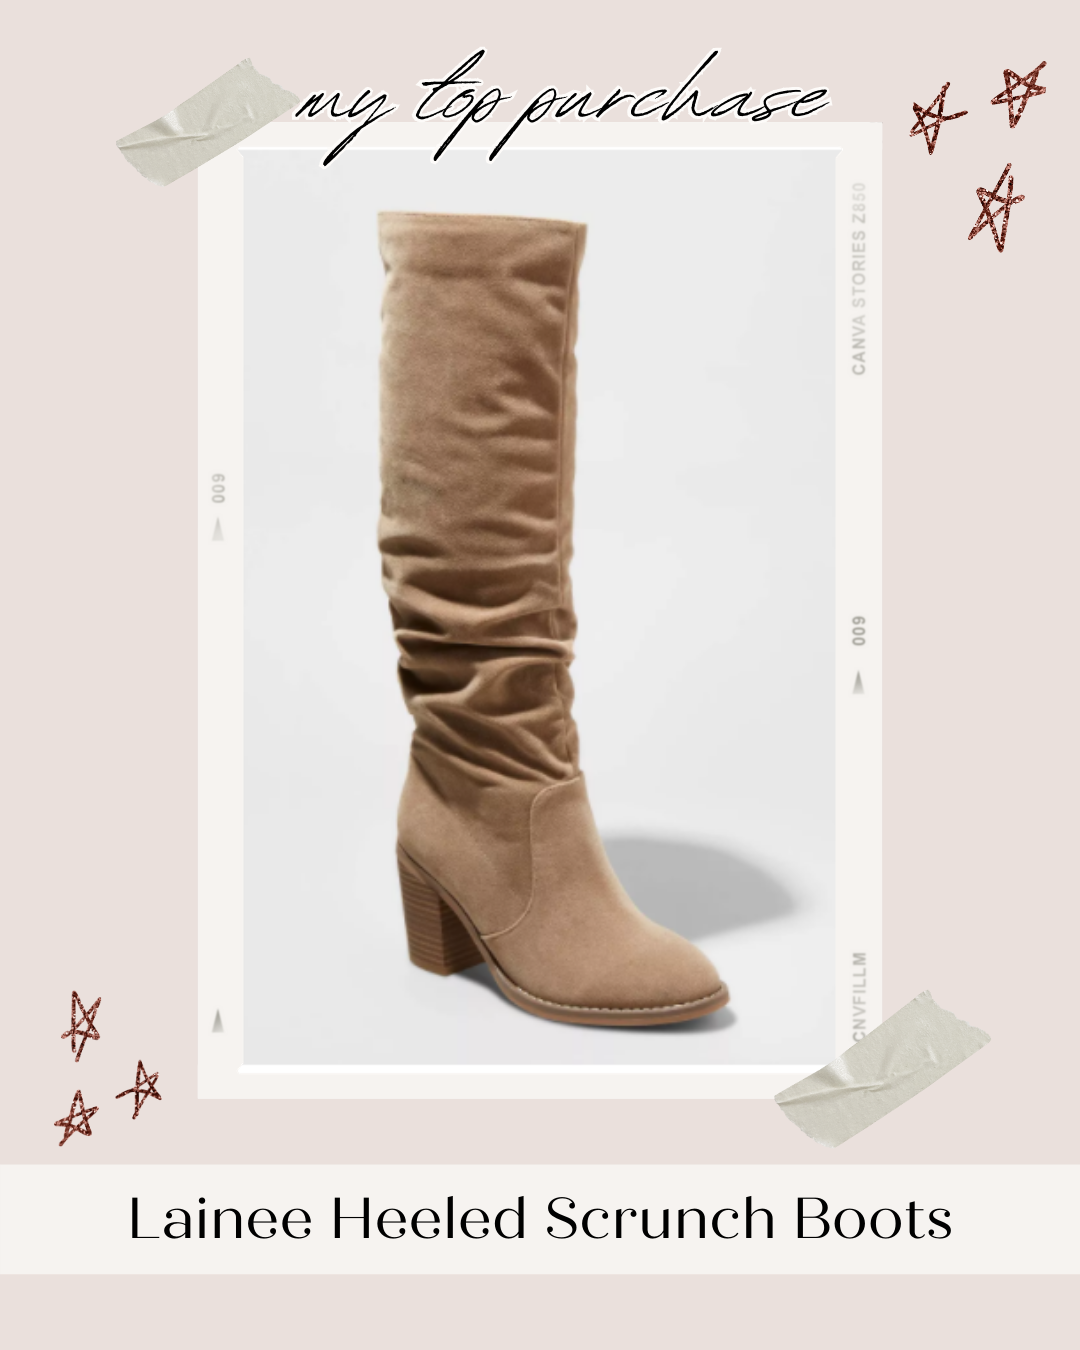 Women's Lainee Heeled Scrunch Fashion Boots - Affordable by Amanda